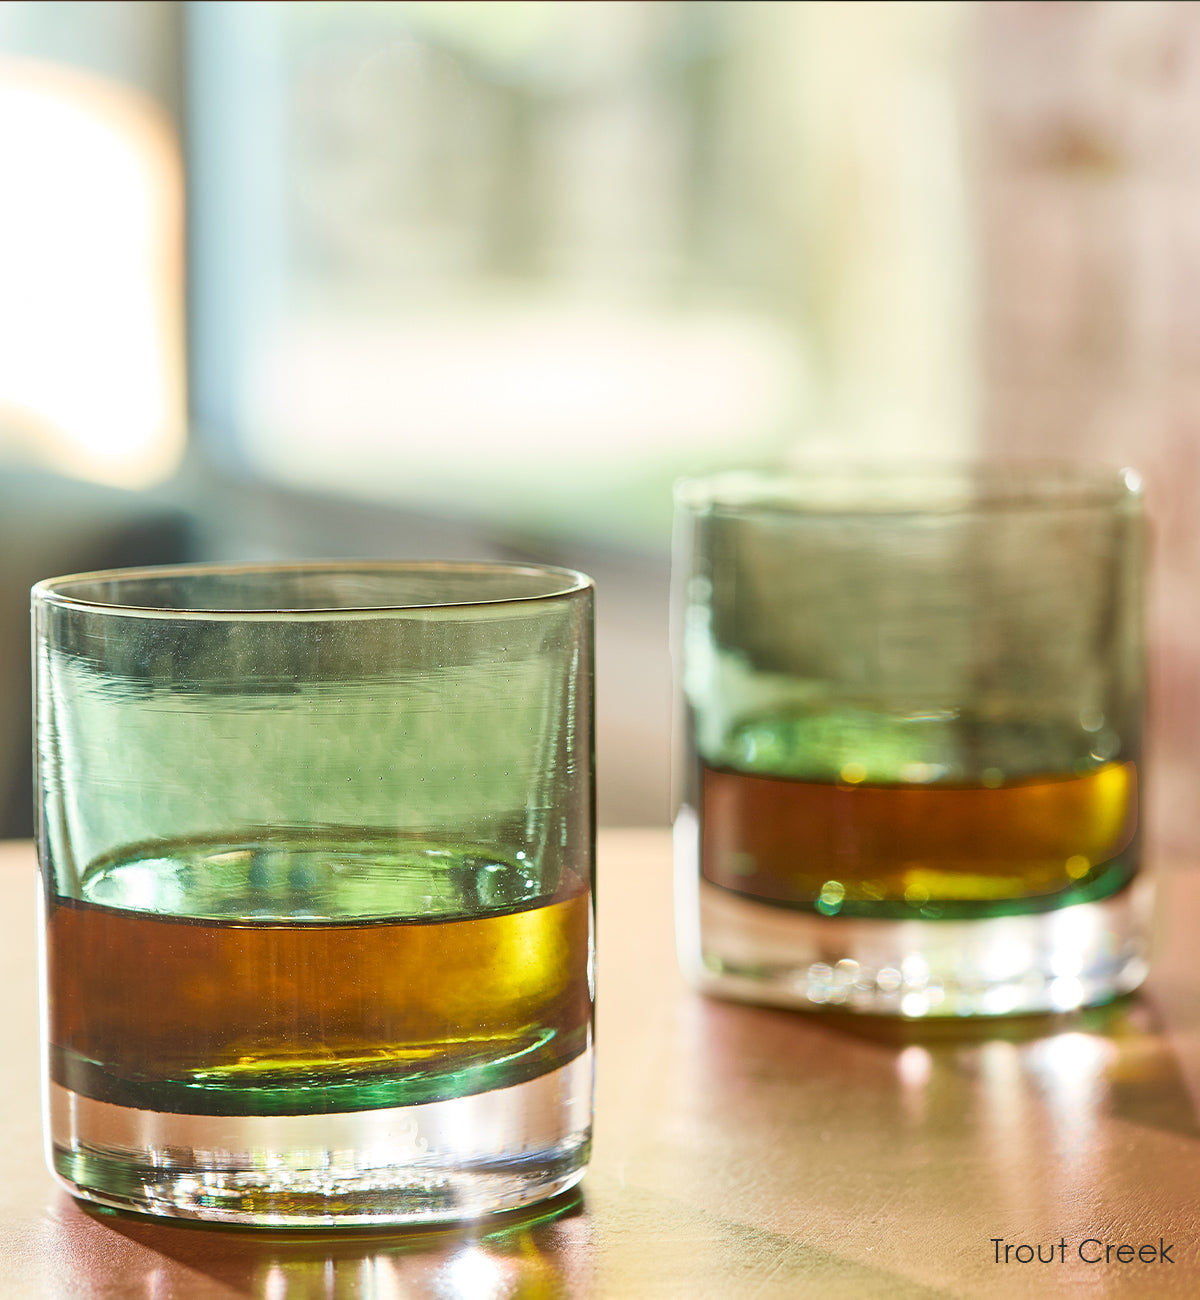 two Trout Creek rockers, dark green teal transparent hand-blown glass lowball drinking glasses with liquid inside on a wood table.